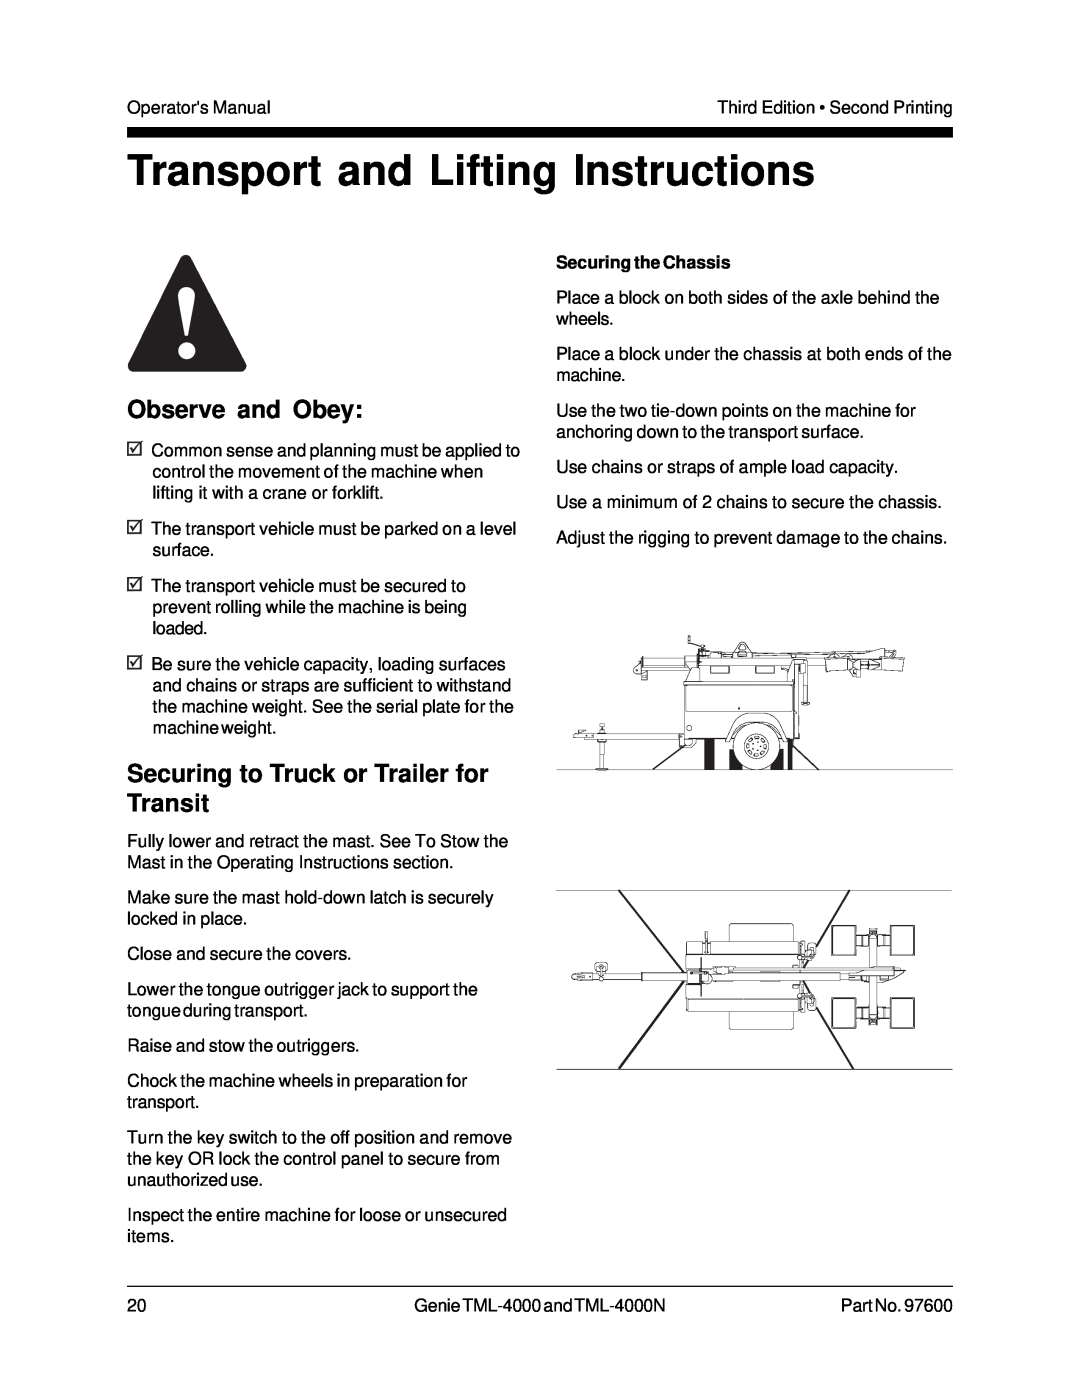 Genie TML-4000 manual Transport and Lifting Instructions, Securing to Truck or Trailer for Transit, Securing the Chassis 